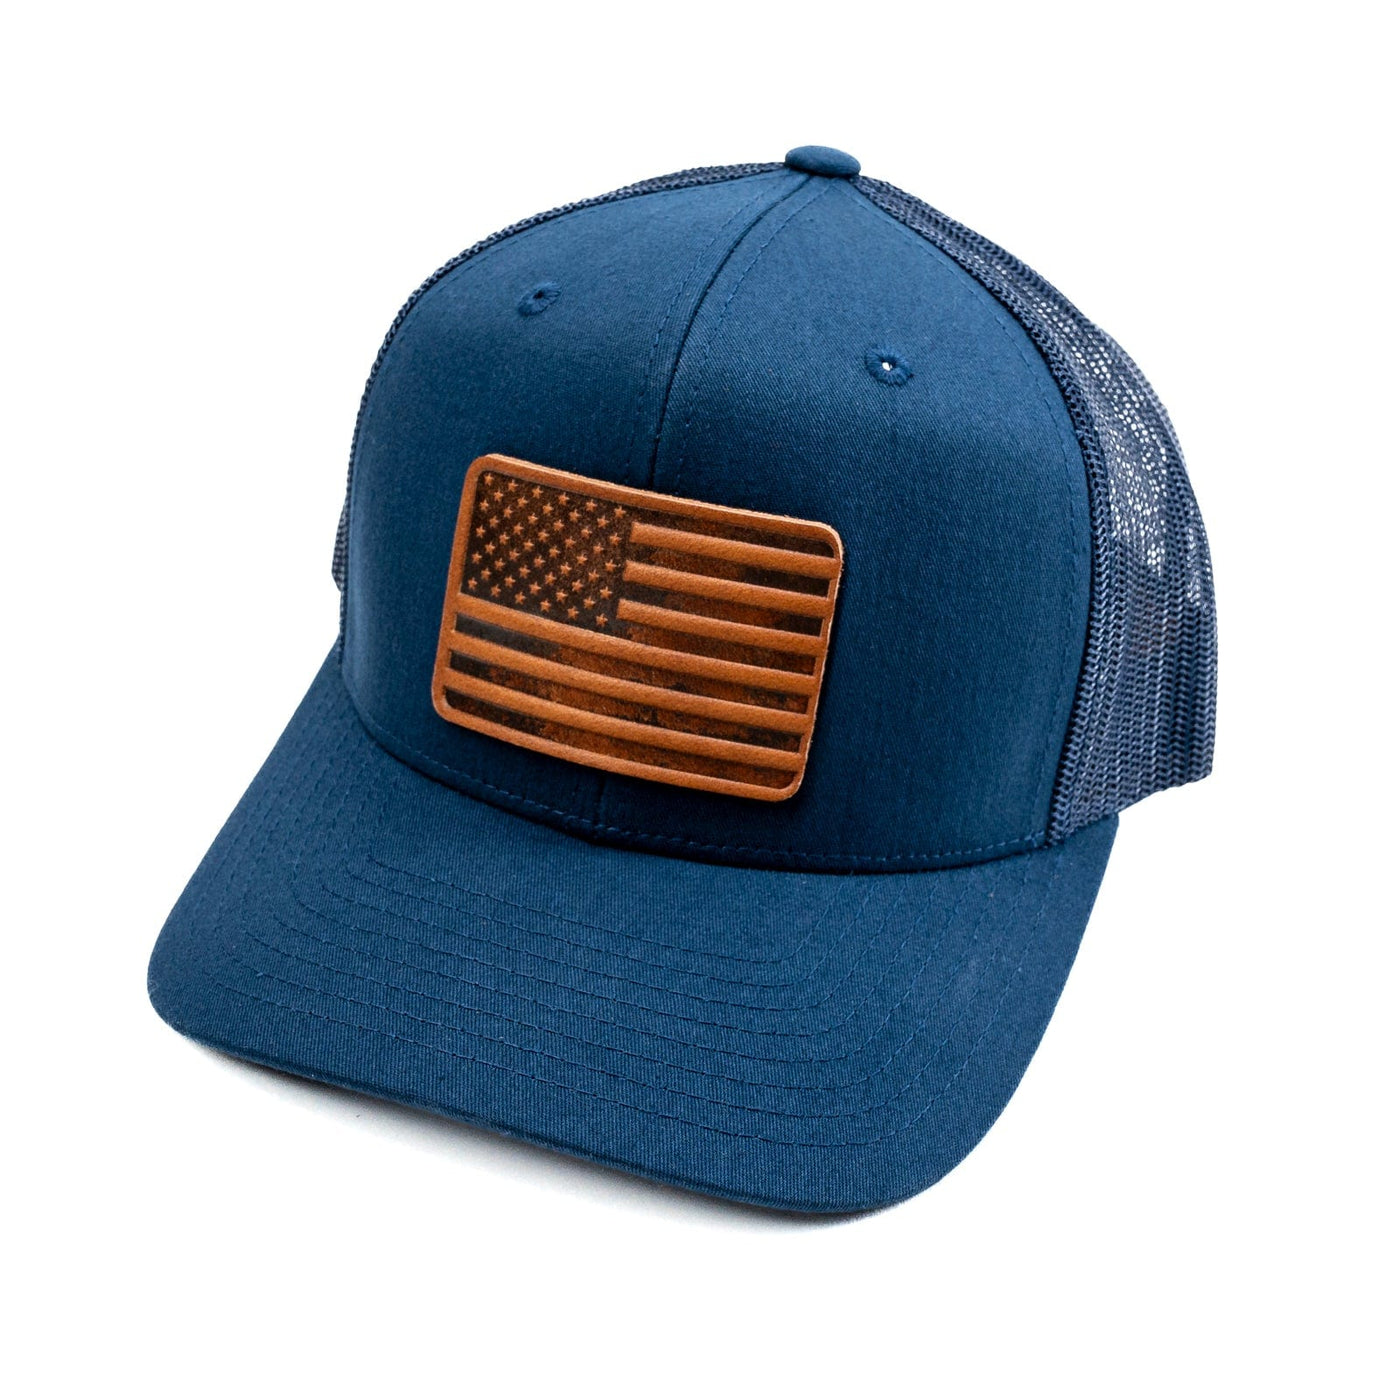 Trucker Hat US Flag | American Flag | Baseball Cap, Snapback Cap with Leather Patch | Popov Leather, Ocean